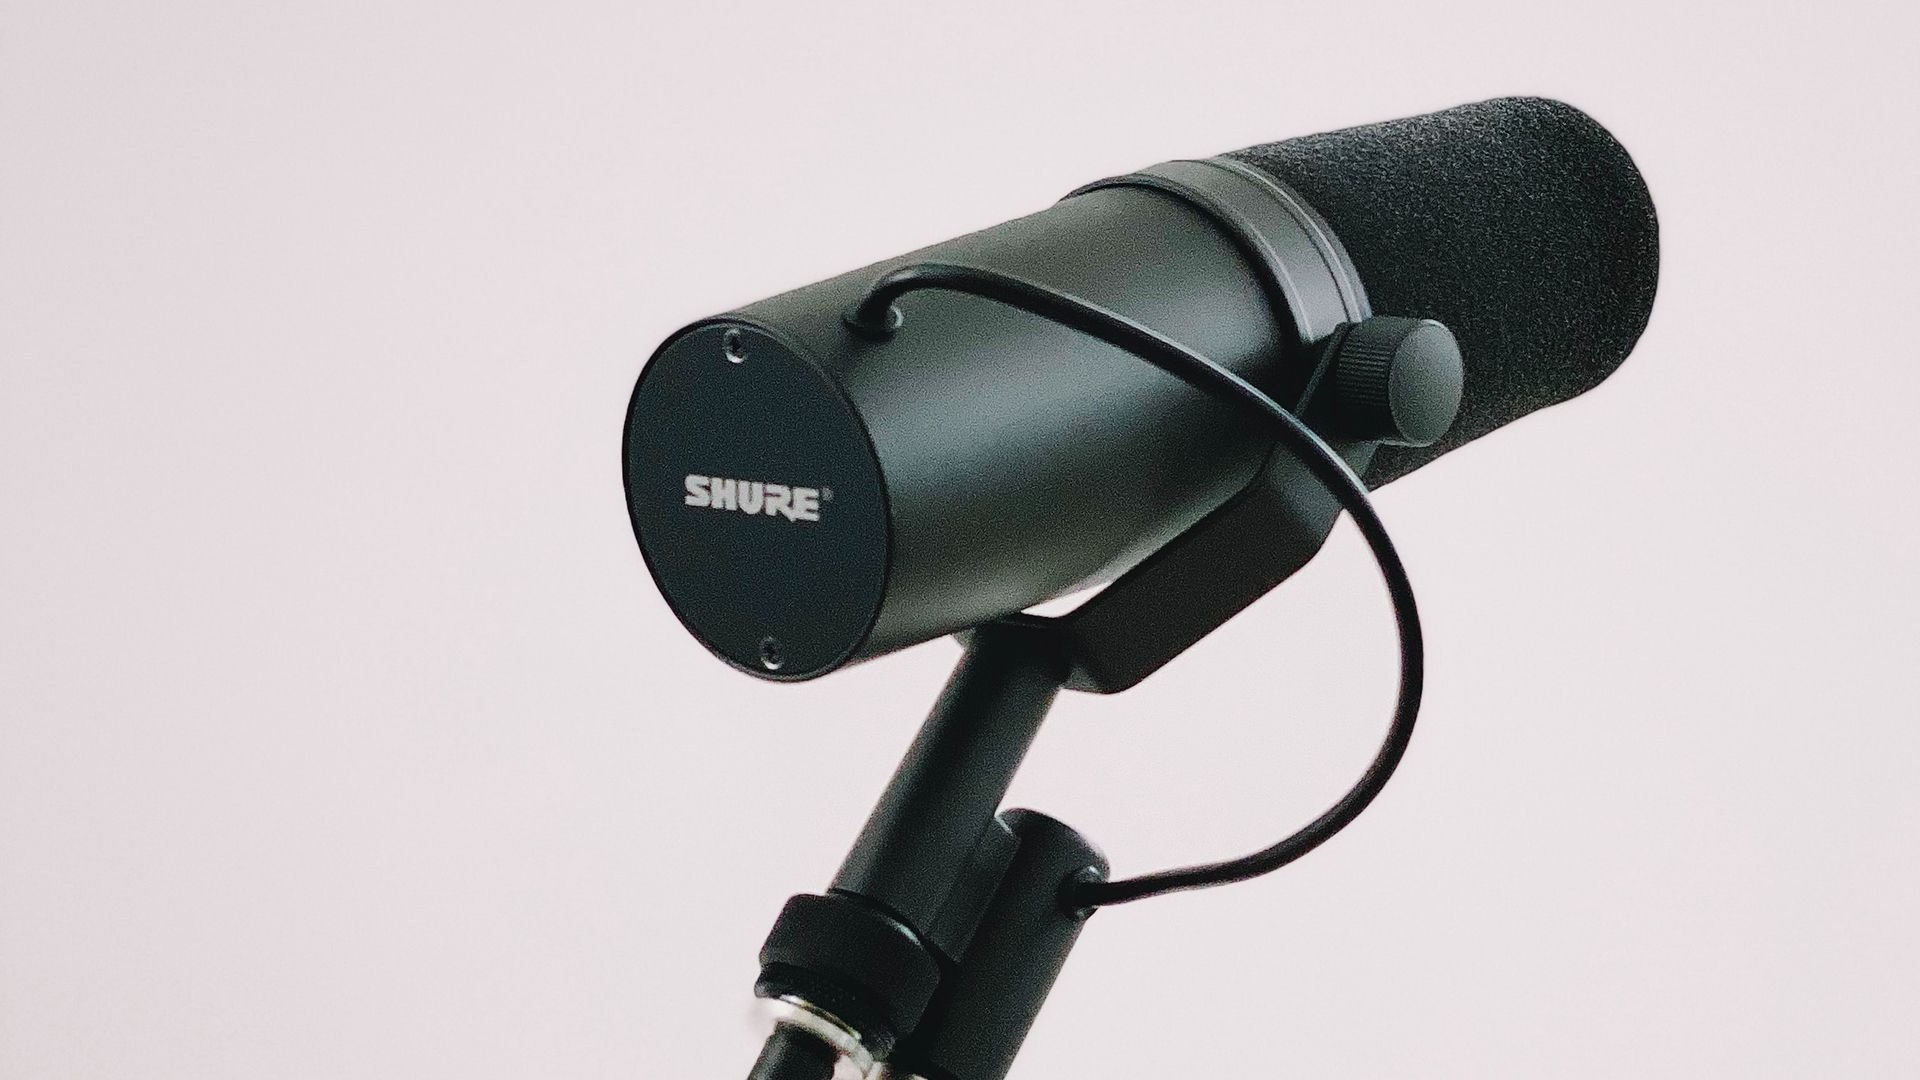 The BEST XLR Microphone For , Streaming, and Podcasting